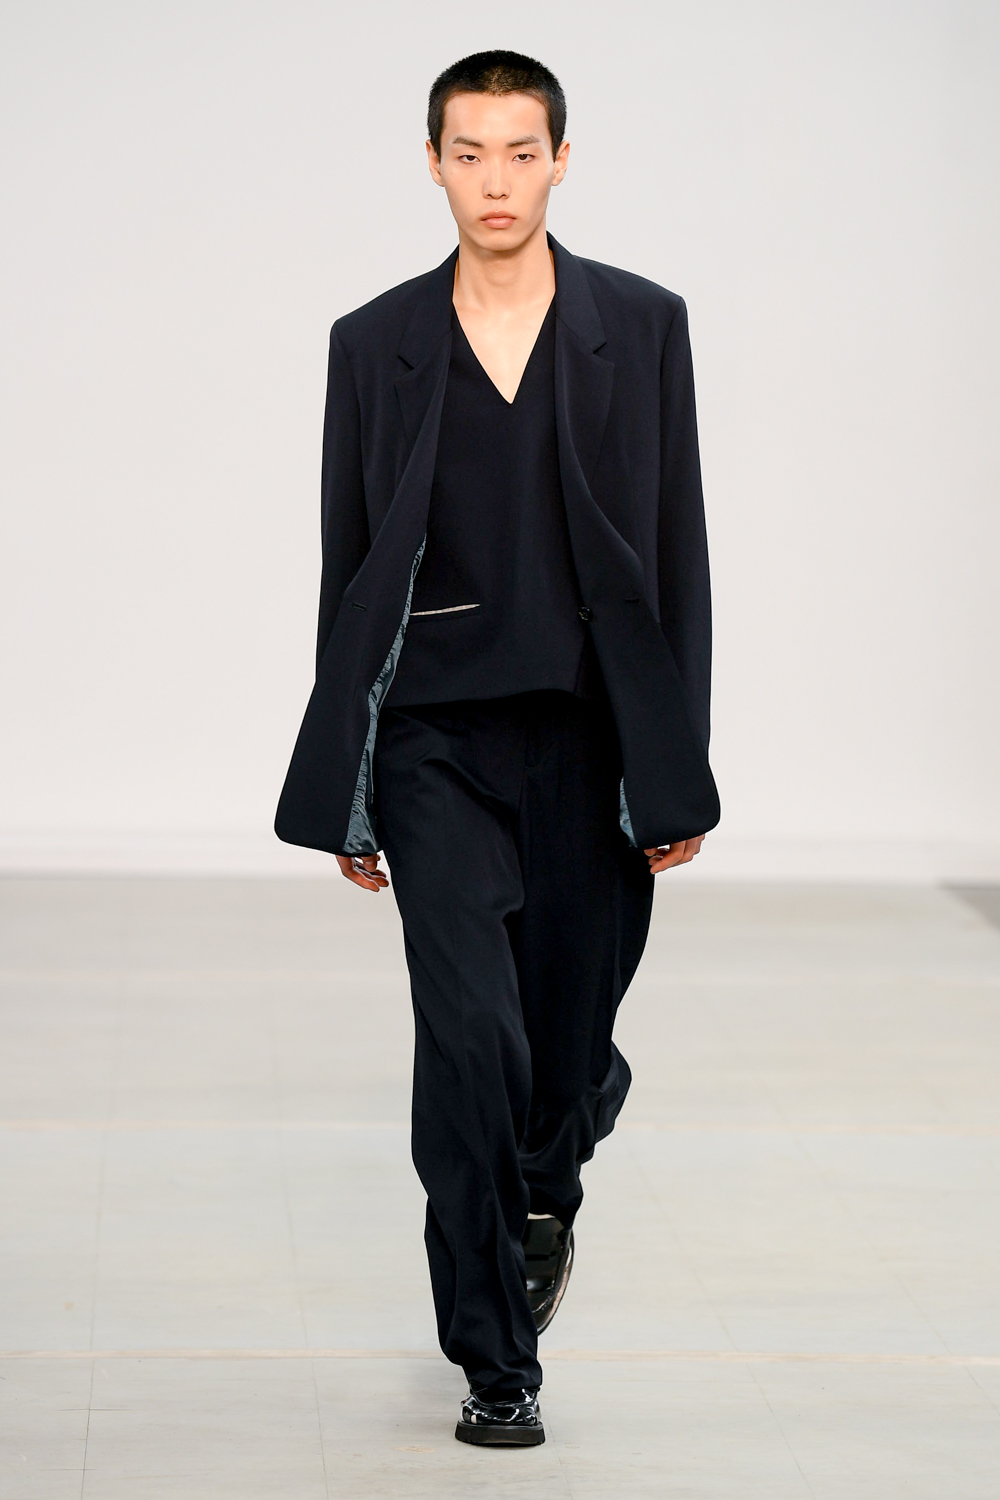 Paul Smith Spring 2023 Men's Fashion Show Review | The Impression